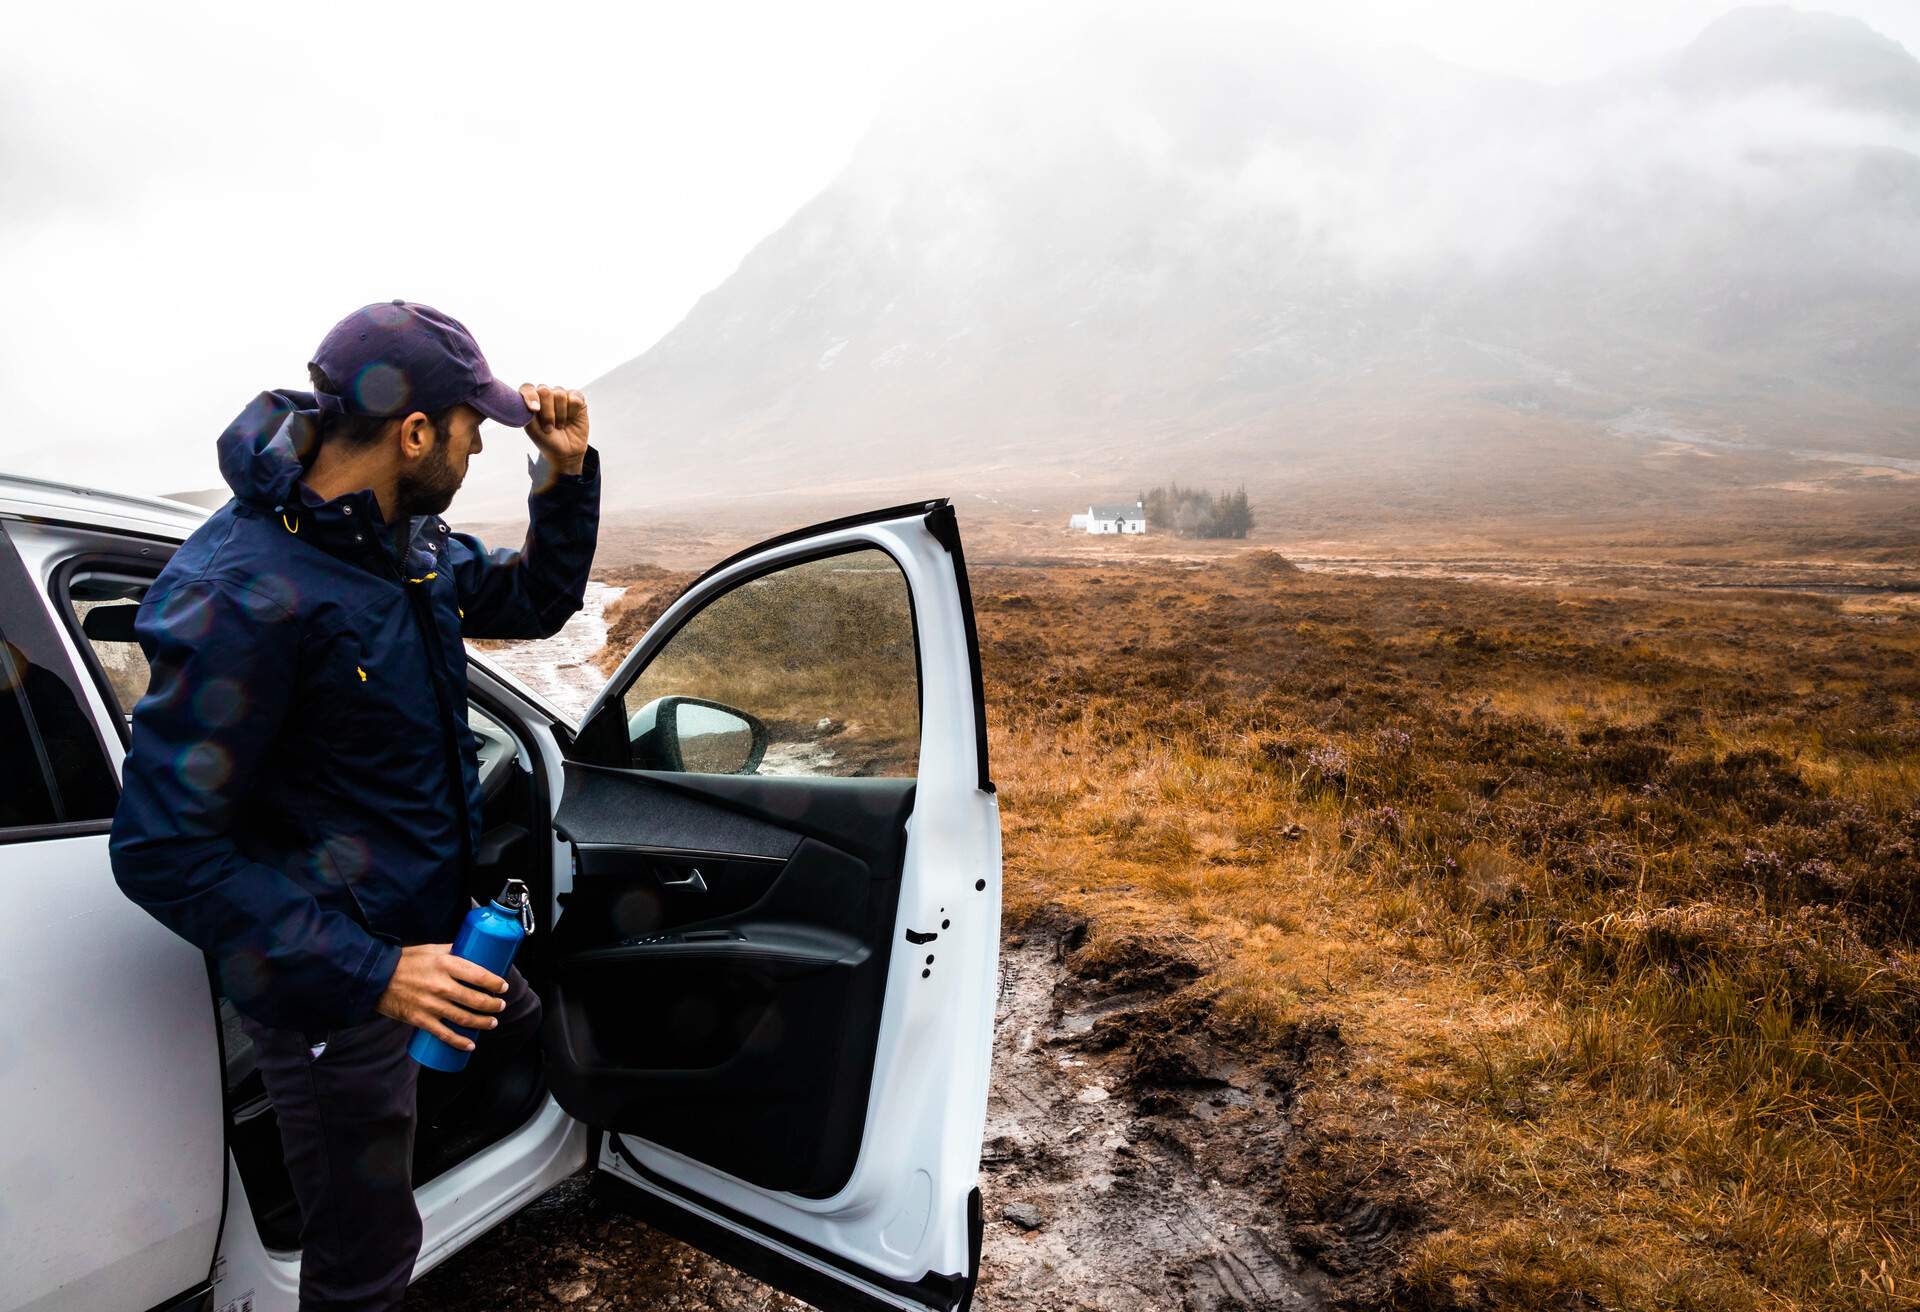 Amidst the challenging conditions of mud and rain, a determined individual clad in a blue windbreaker emerges from a white car, equipped with a flask.